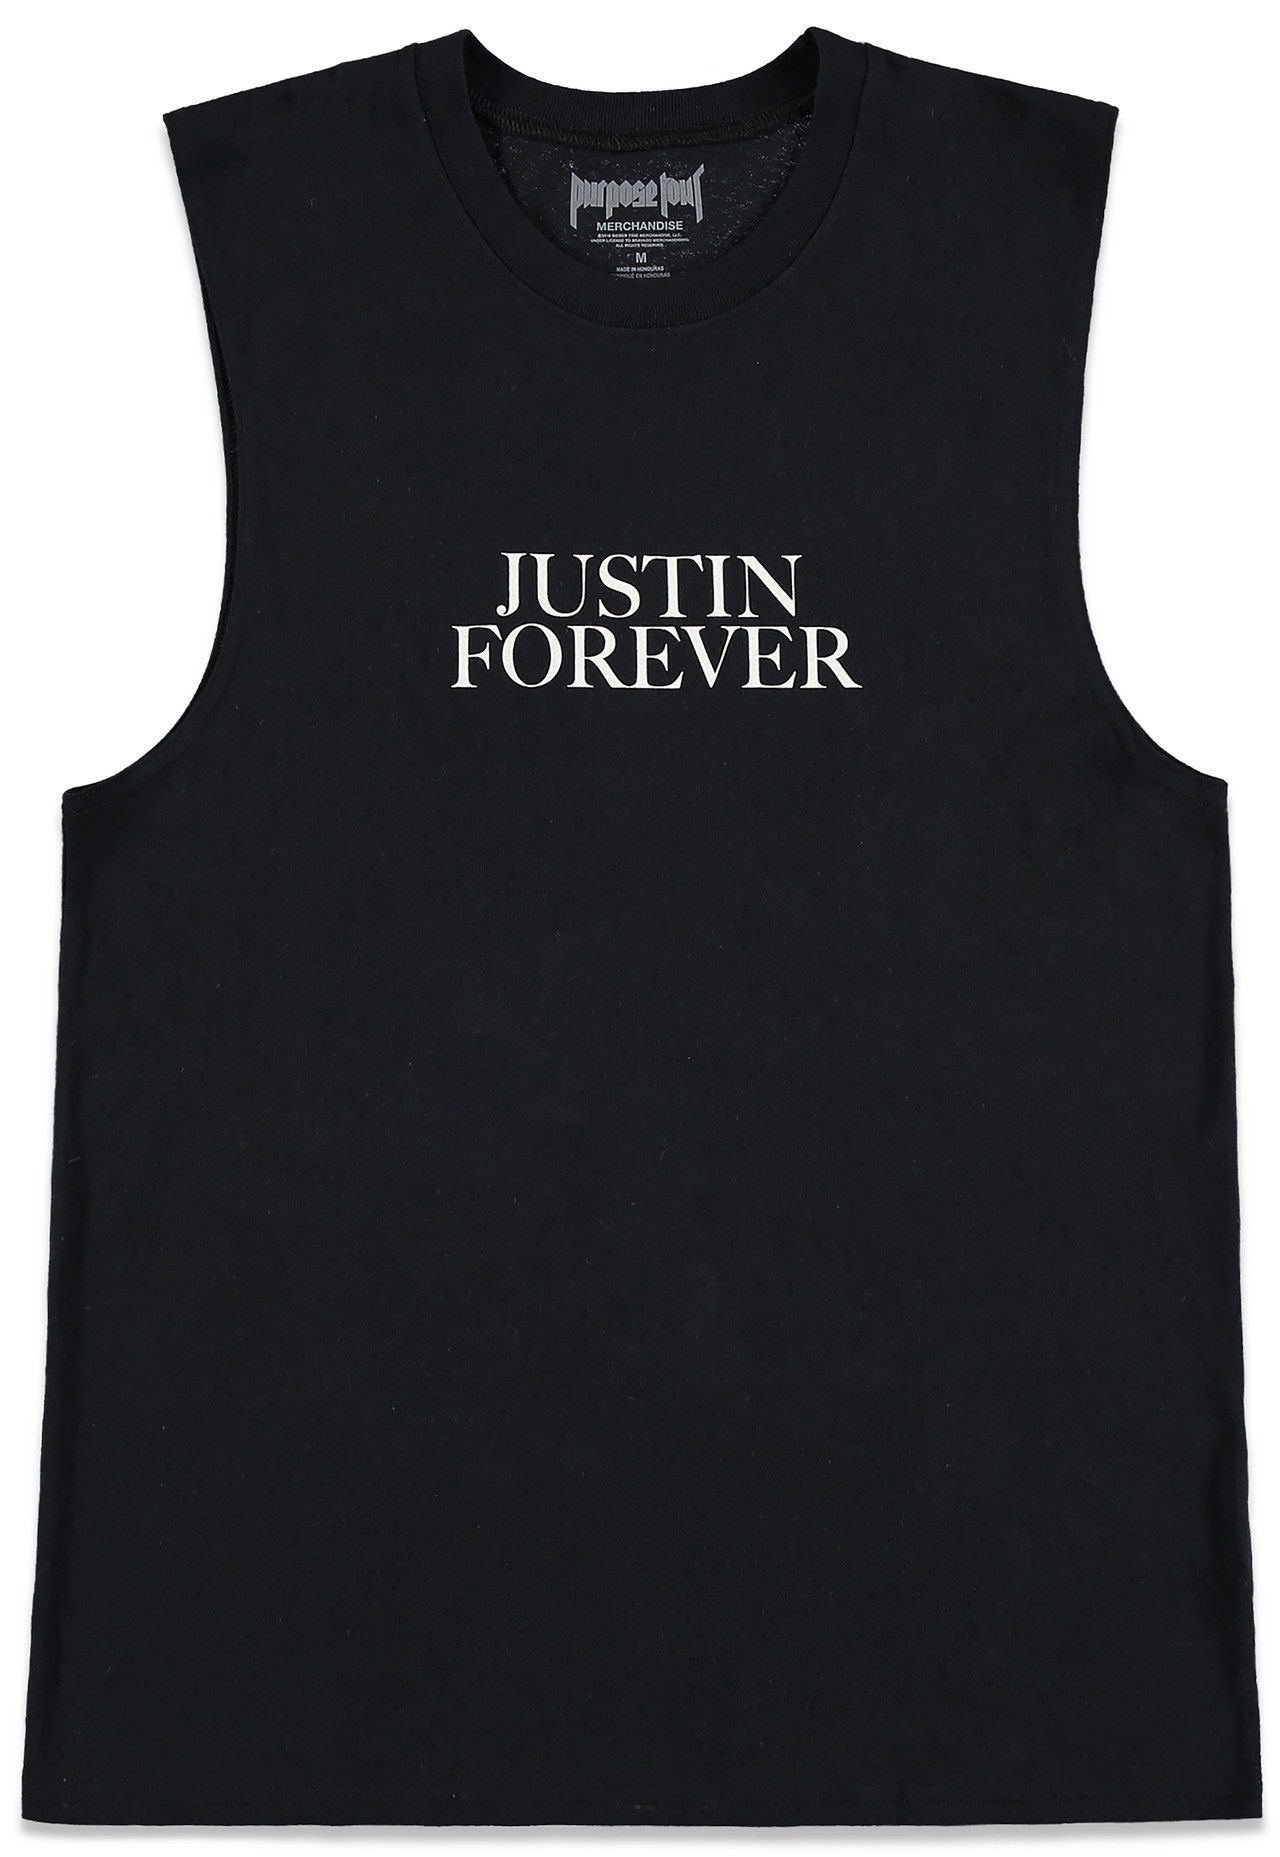 Nádrž, [$18](http://www.forever21.com/Product/Product.aspx?BR=f21&Category=promo-purpose-tour&ProductID=2000231524&VariantID=011)